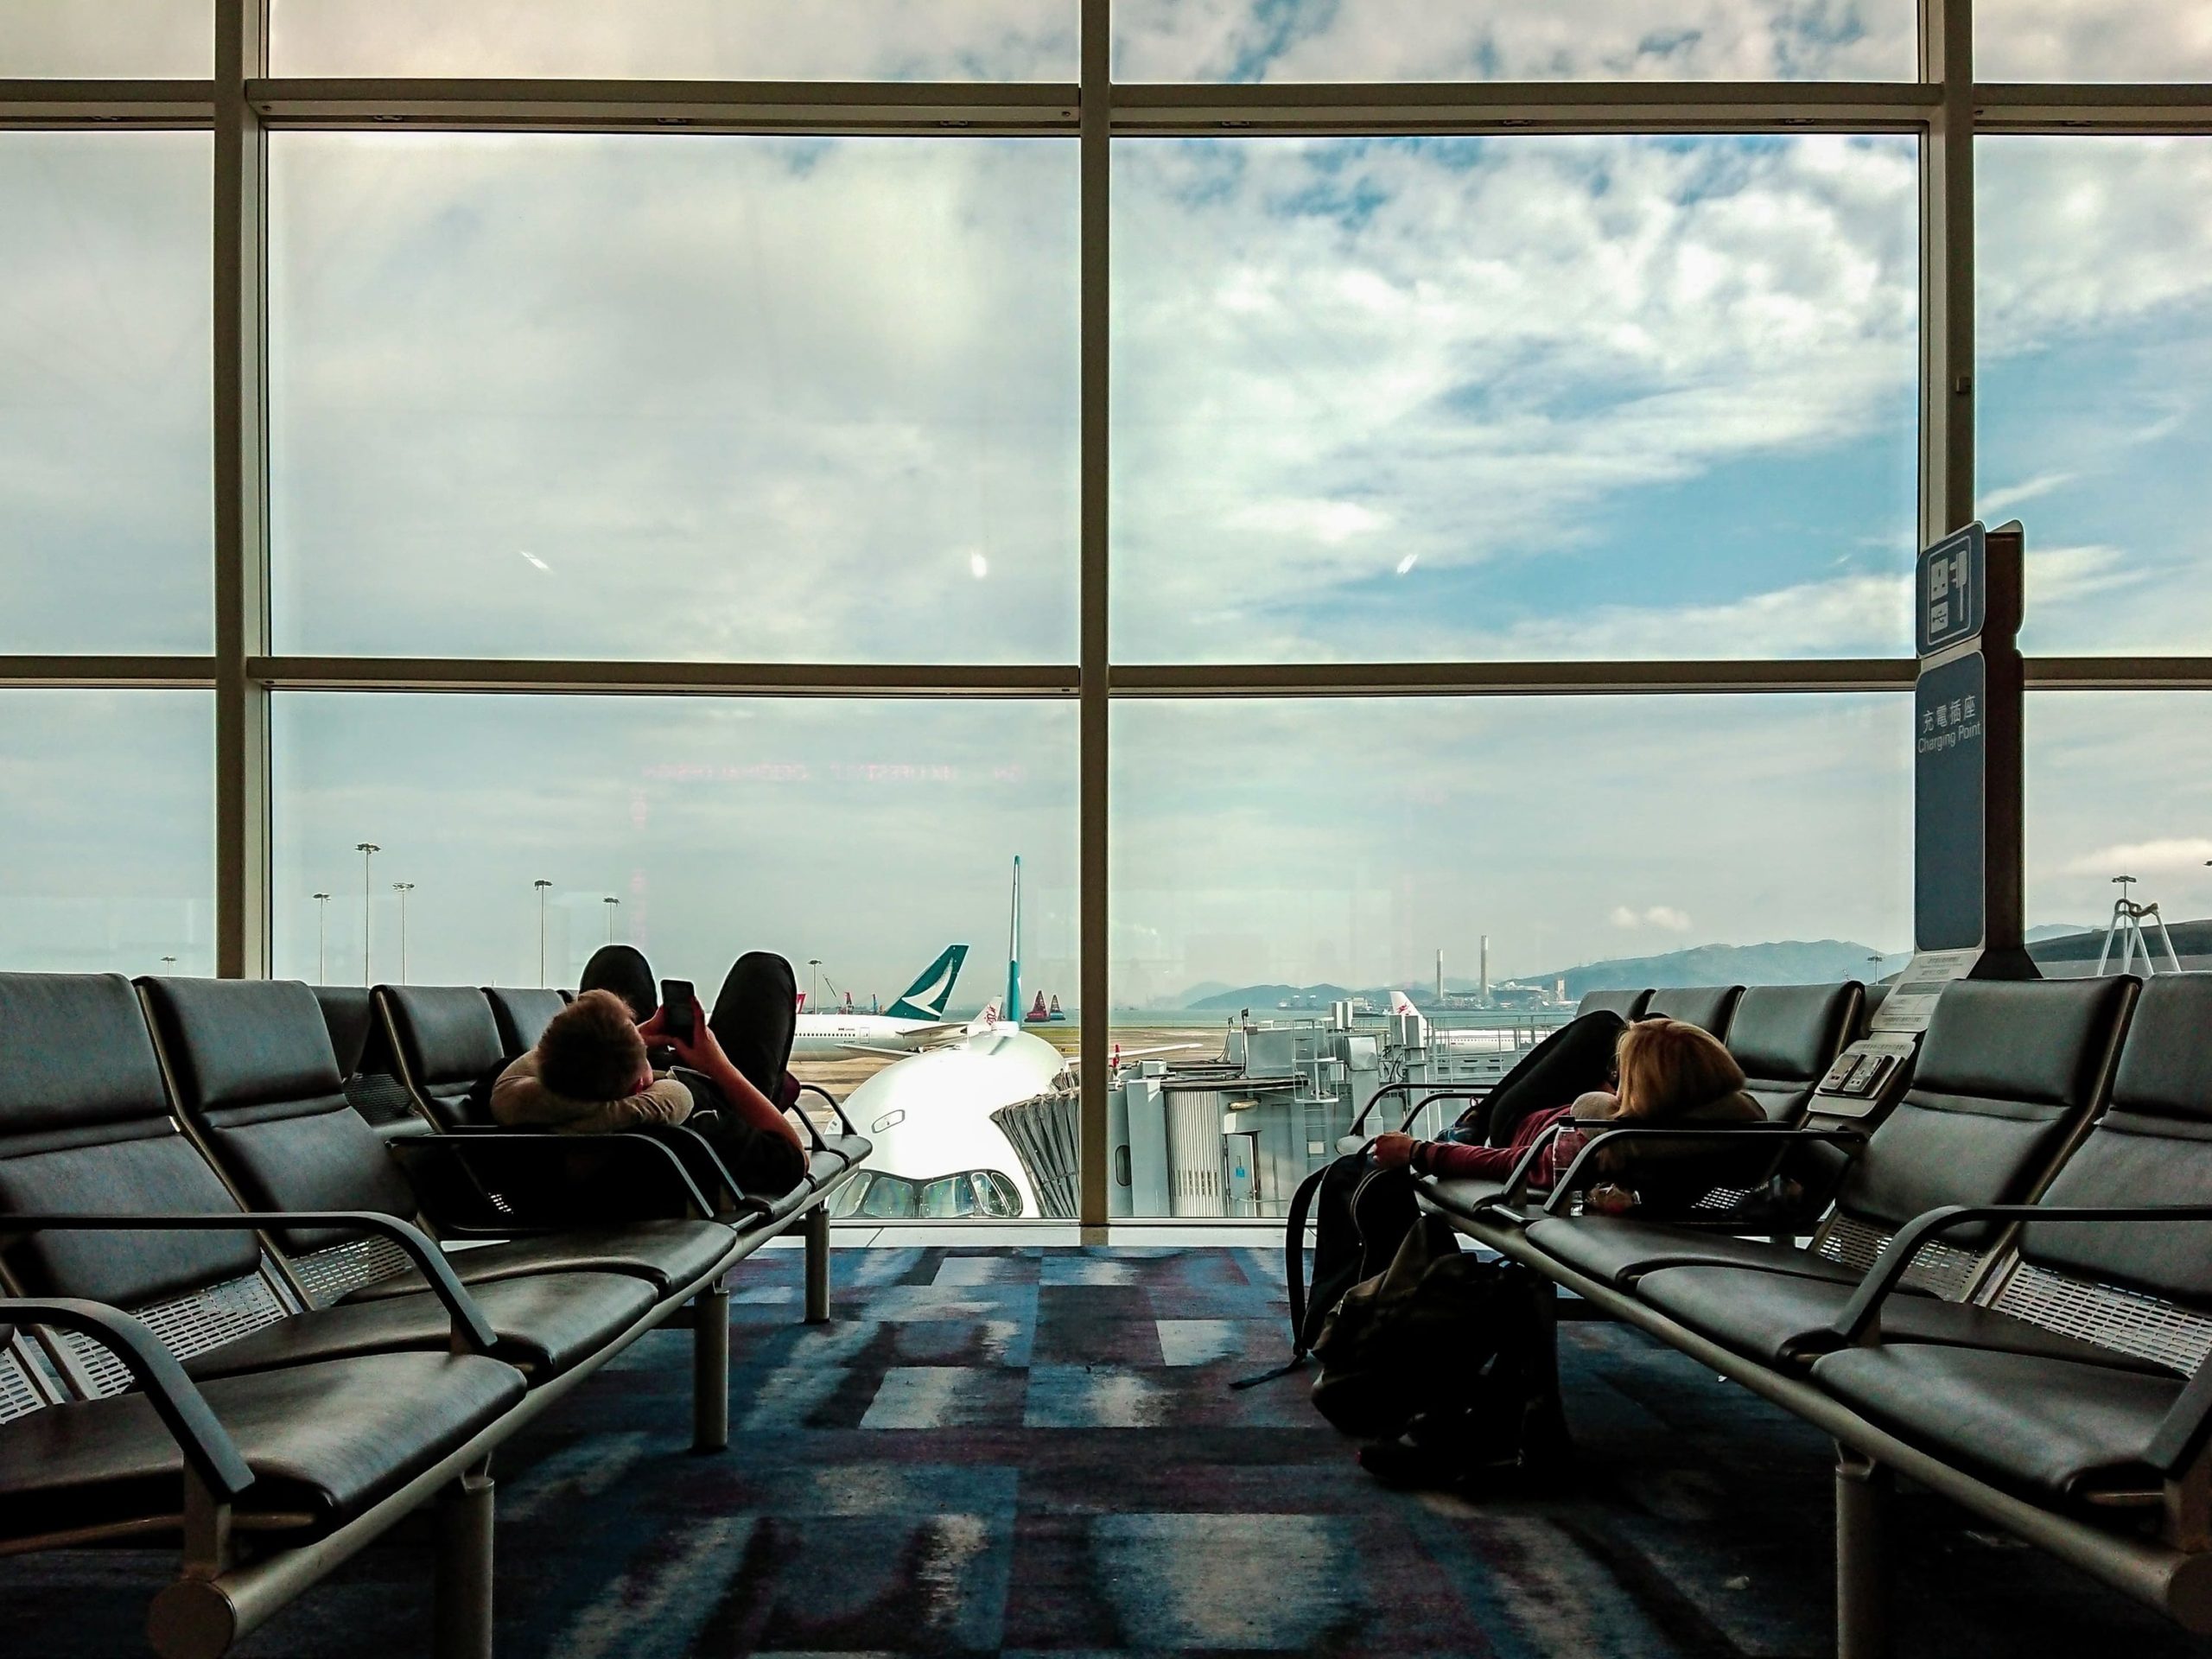  Stuck at the airport because of a delayed or cancelled flight? You probably can claim a compensation for it!